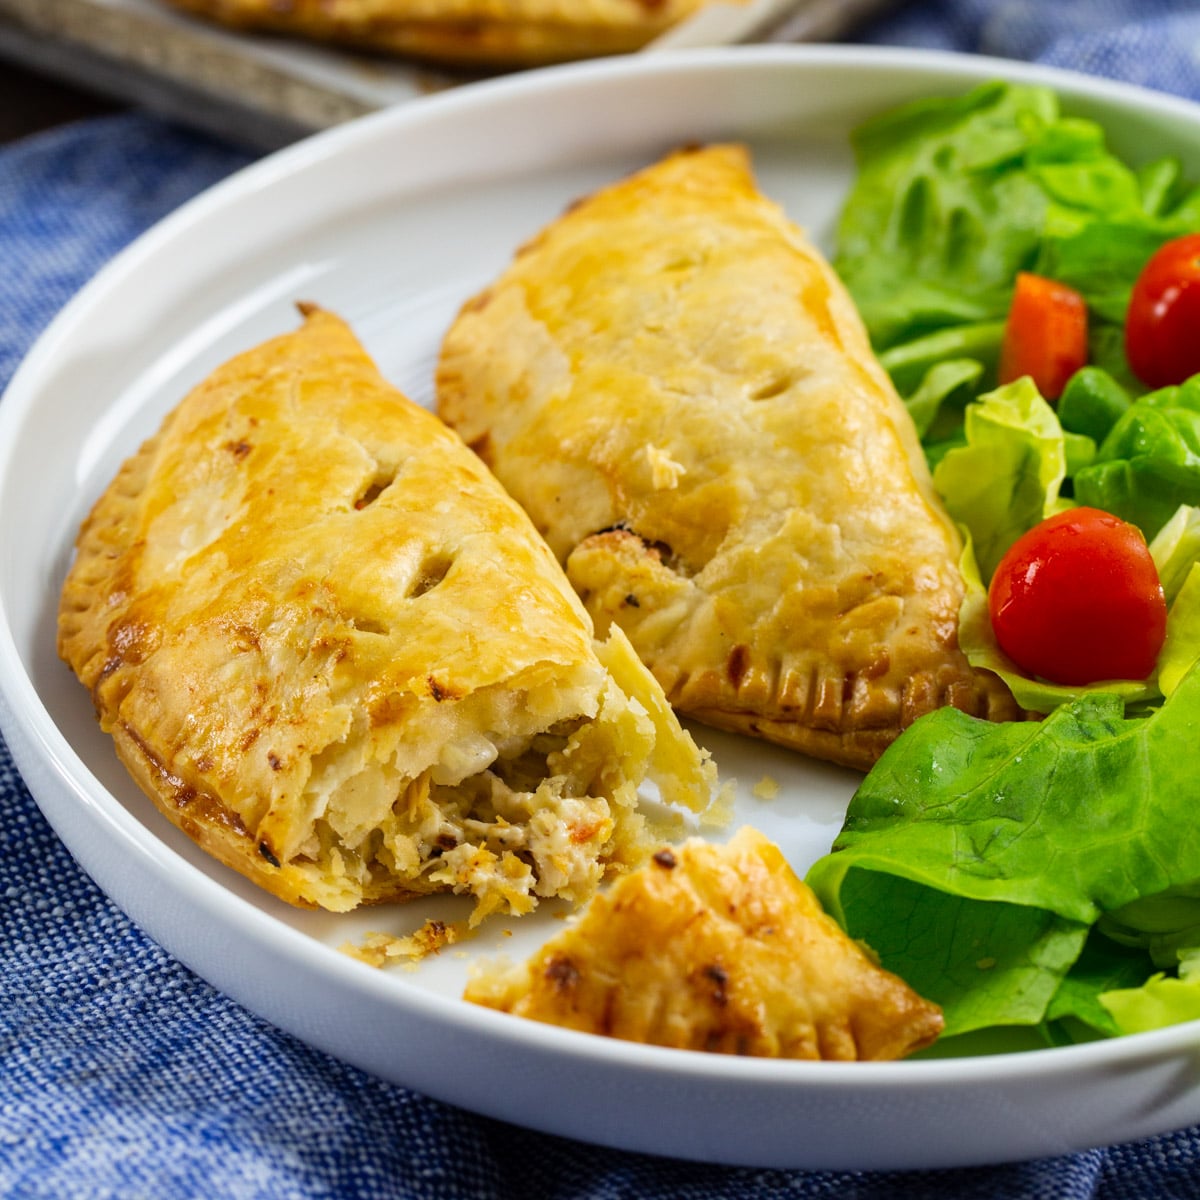 Two Creamy Chicken Hand Pies on plate with salad.